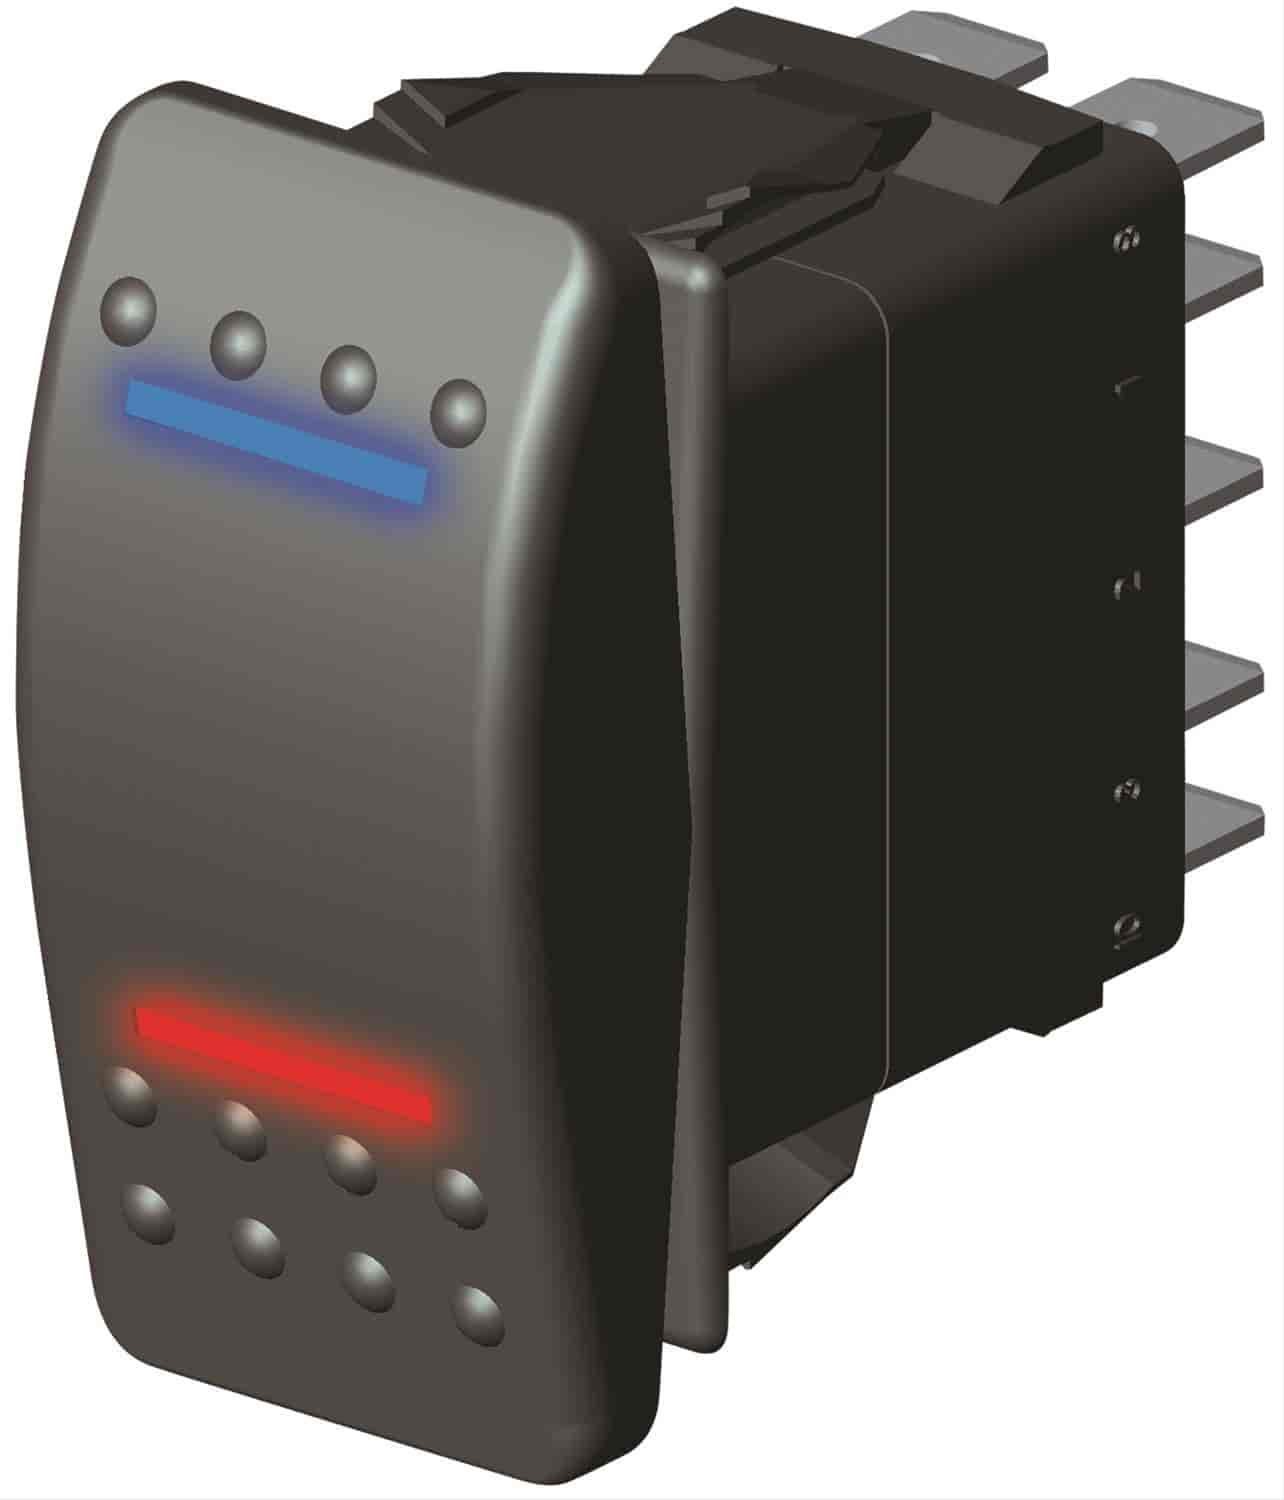 Illuminated 3-Way Switch Blue = ON Position Forcing Fan to 100% For Towing or Race Applications